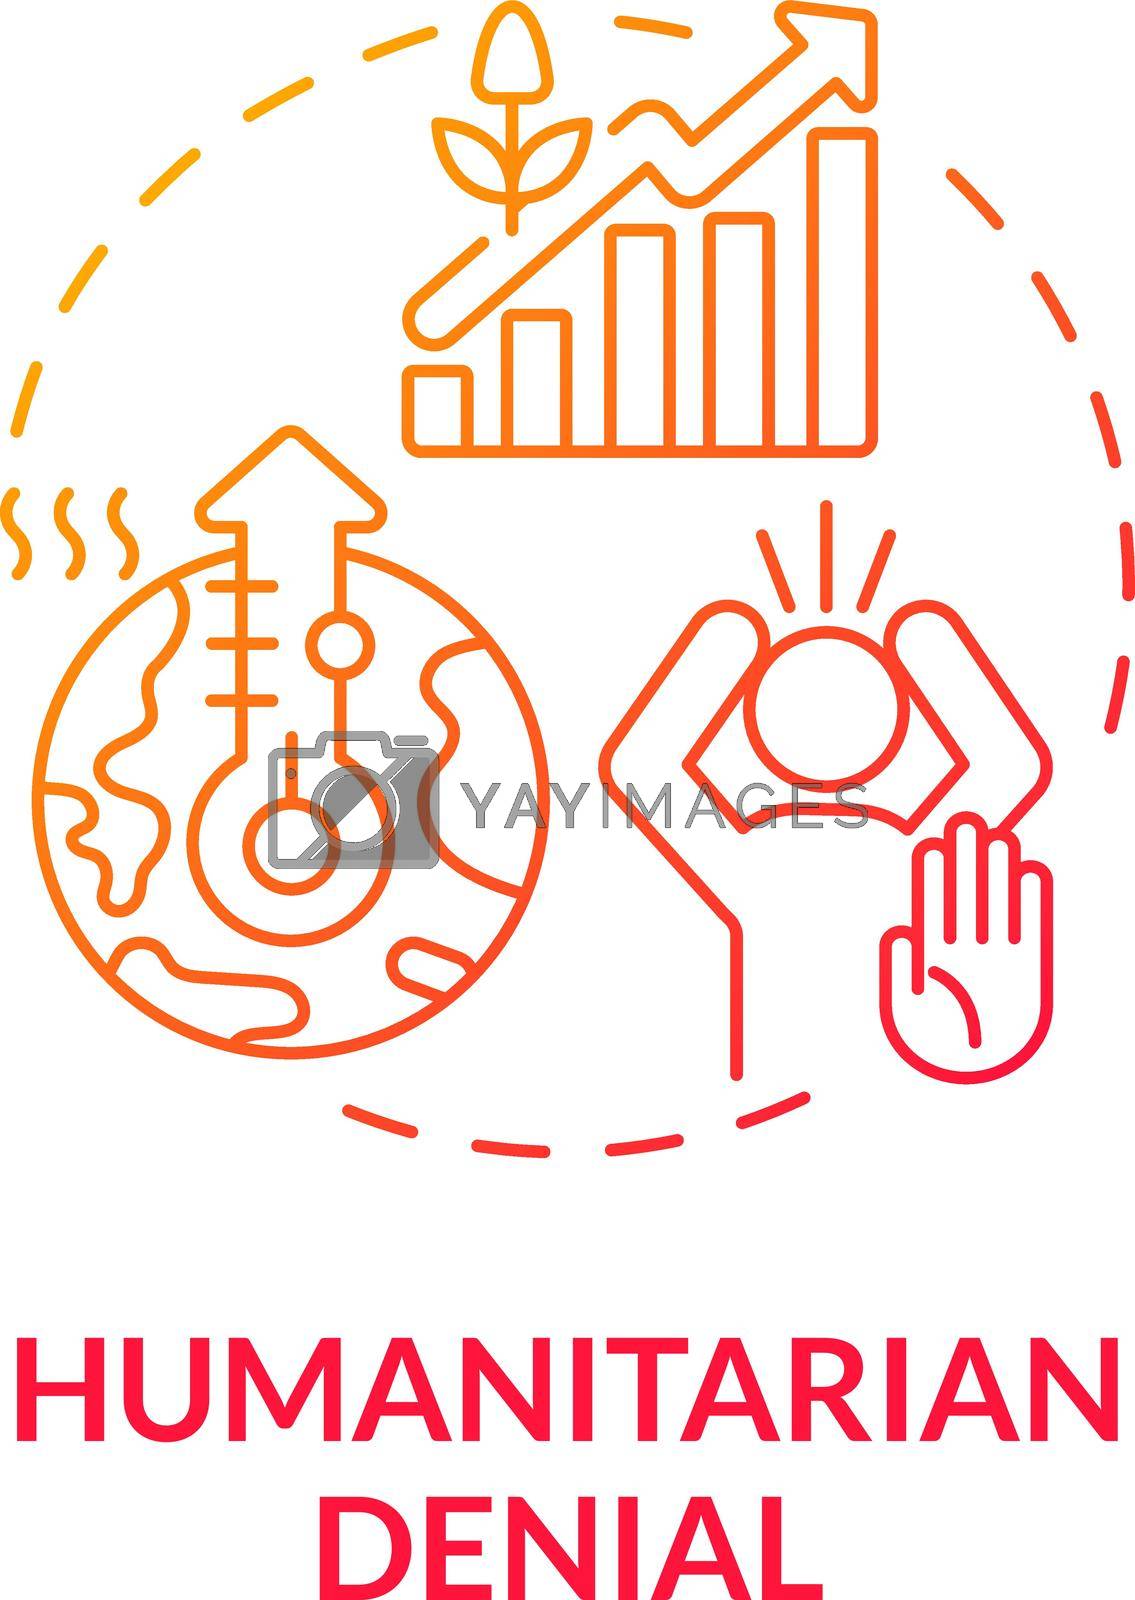 Humanitarian denial concept icon. Increased frequency of heatwaves. Climate change effects plants growth and productivity abstract idea thin line illustration. Vector isolated outline color drawing.